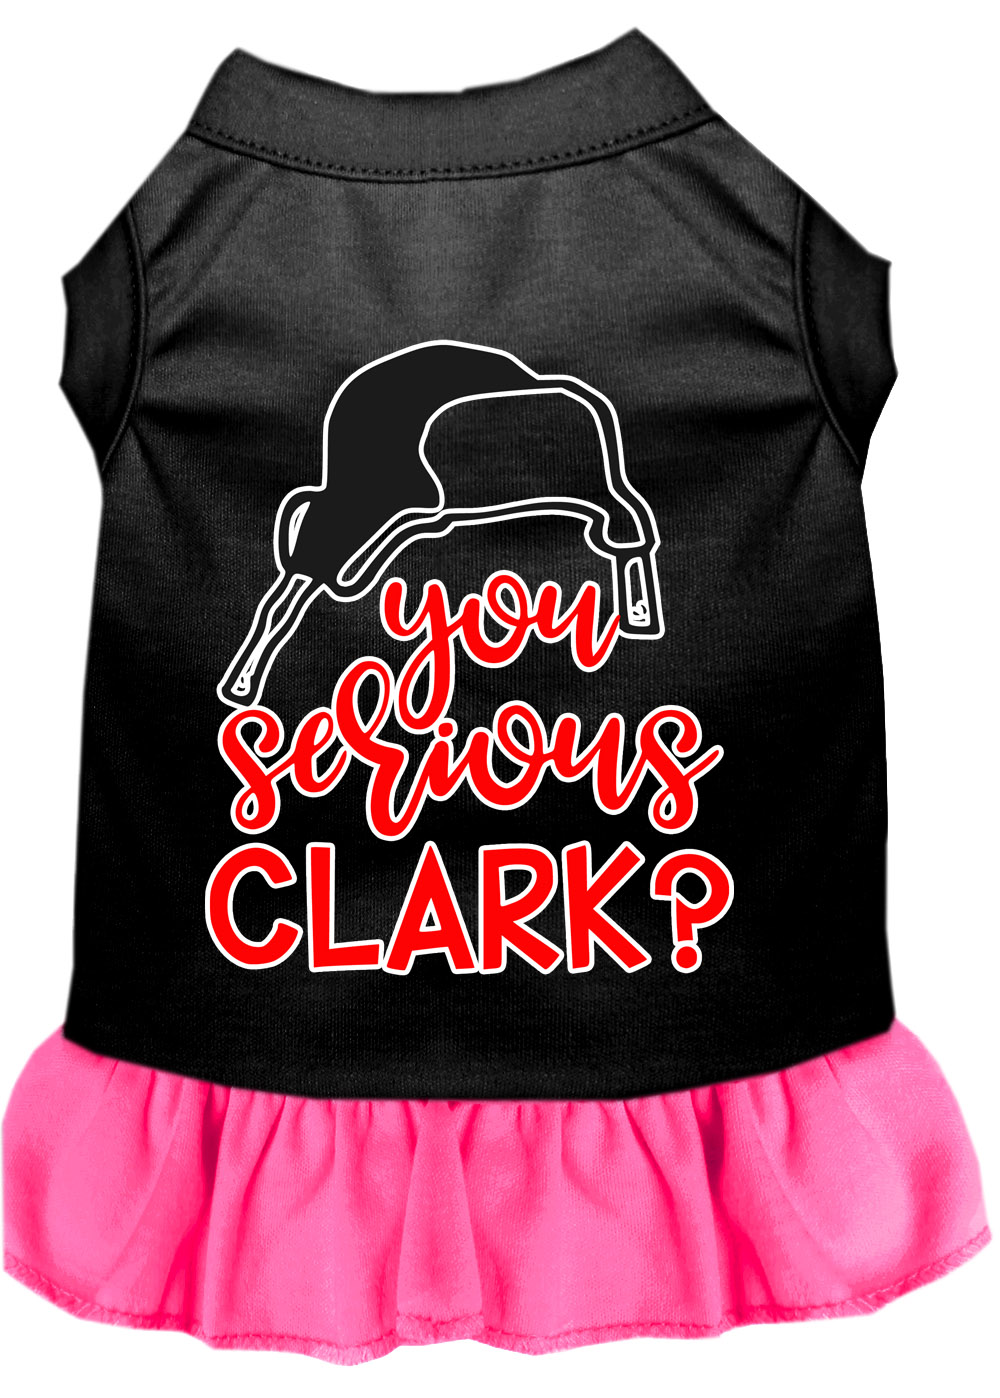 You Serious Clark? Screen Print Dog Dress Black with Bright Pink XL